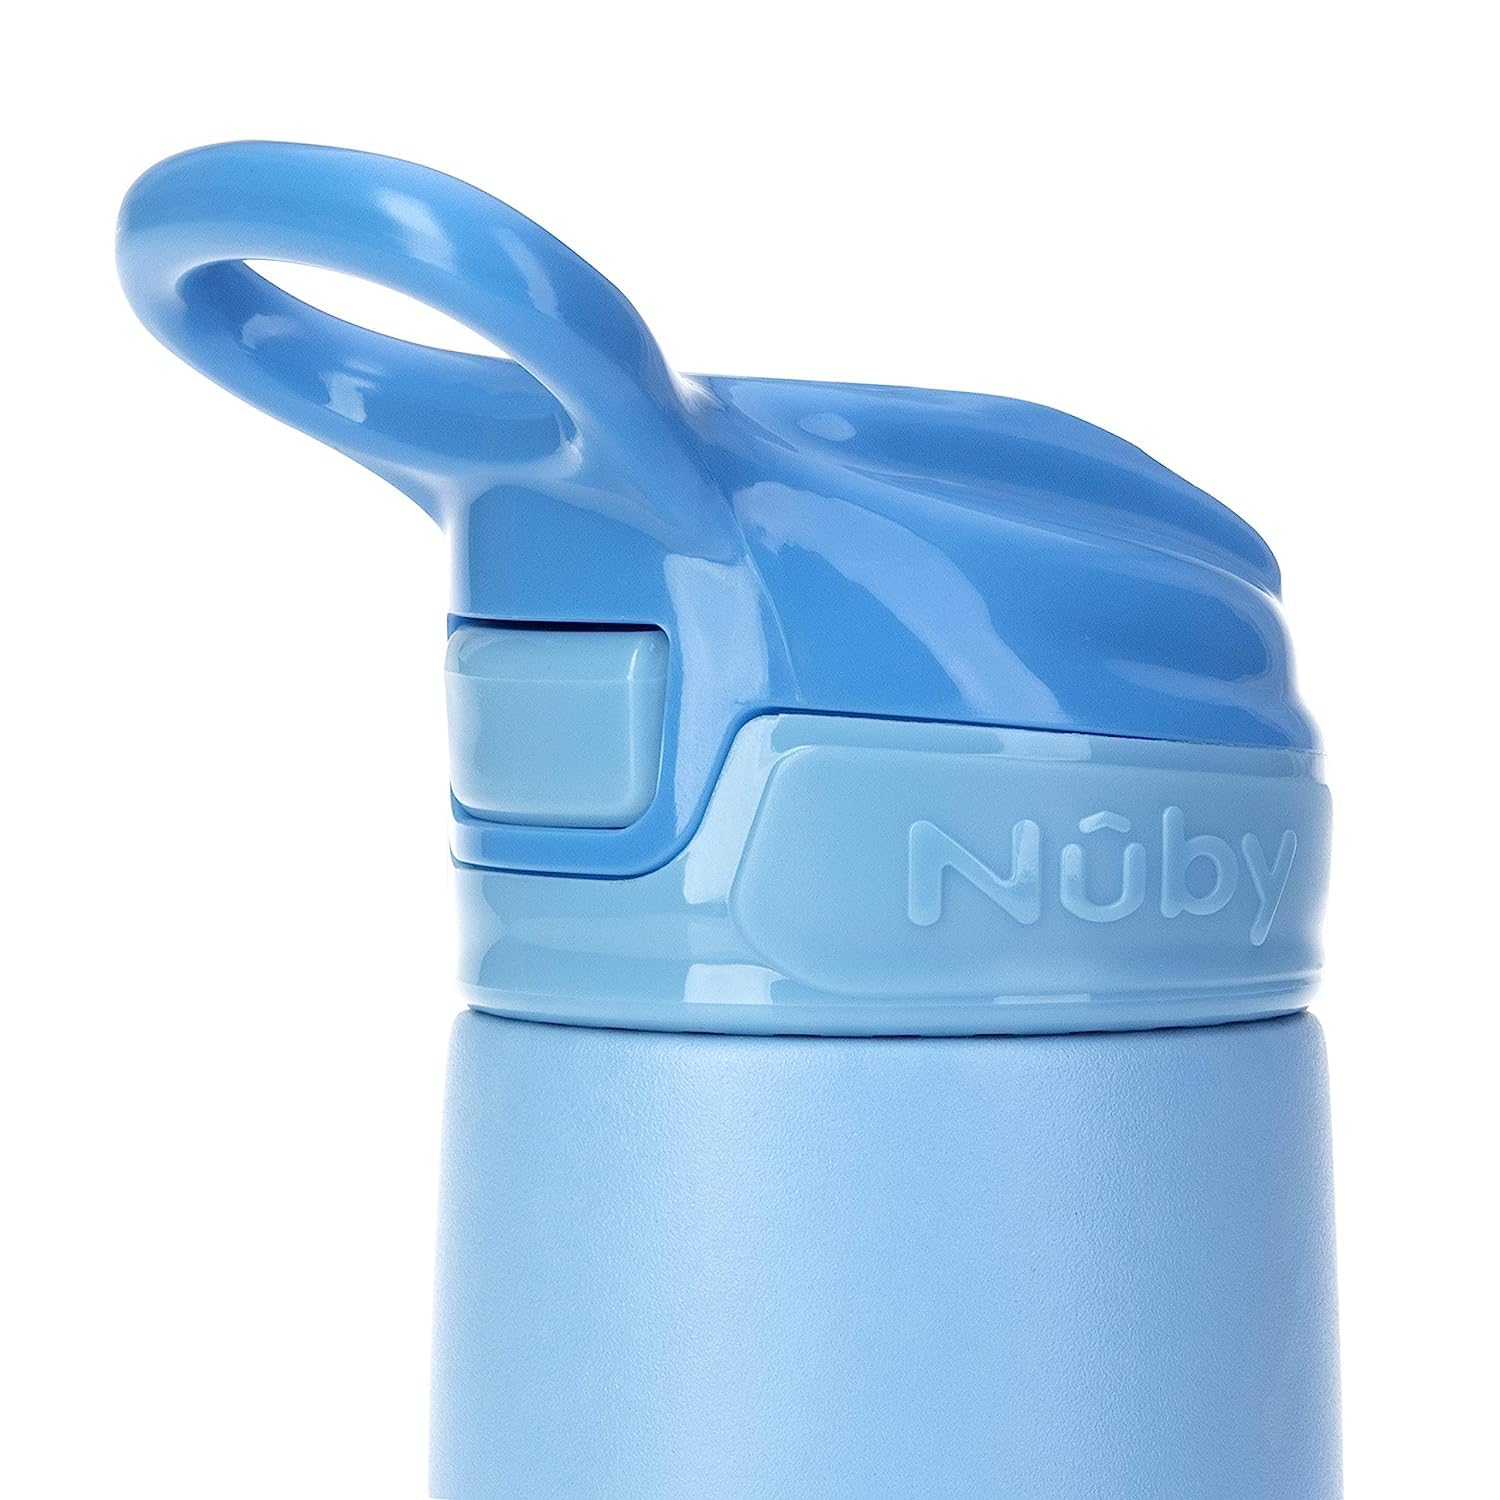 Nuby Thirsty Kids No Spill Flip-It Reflex Stainless Steel Travel Cup or Water Bottle, Blue, 10 Oz